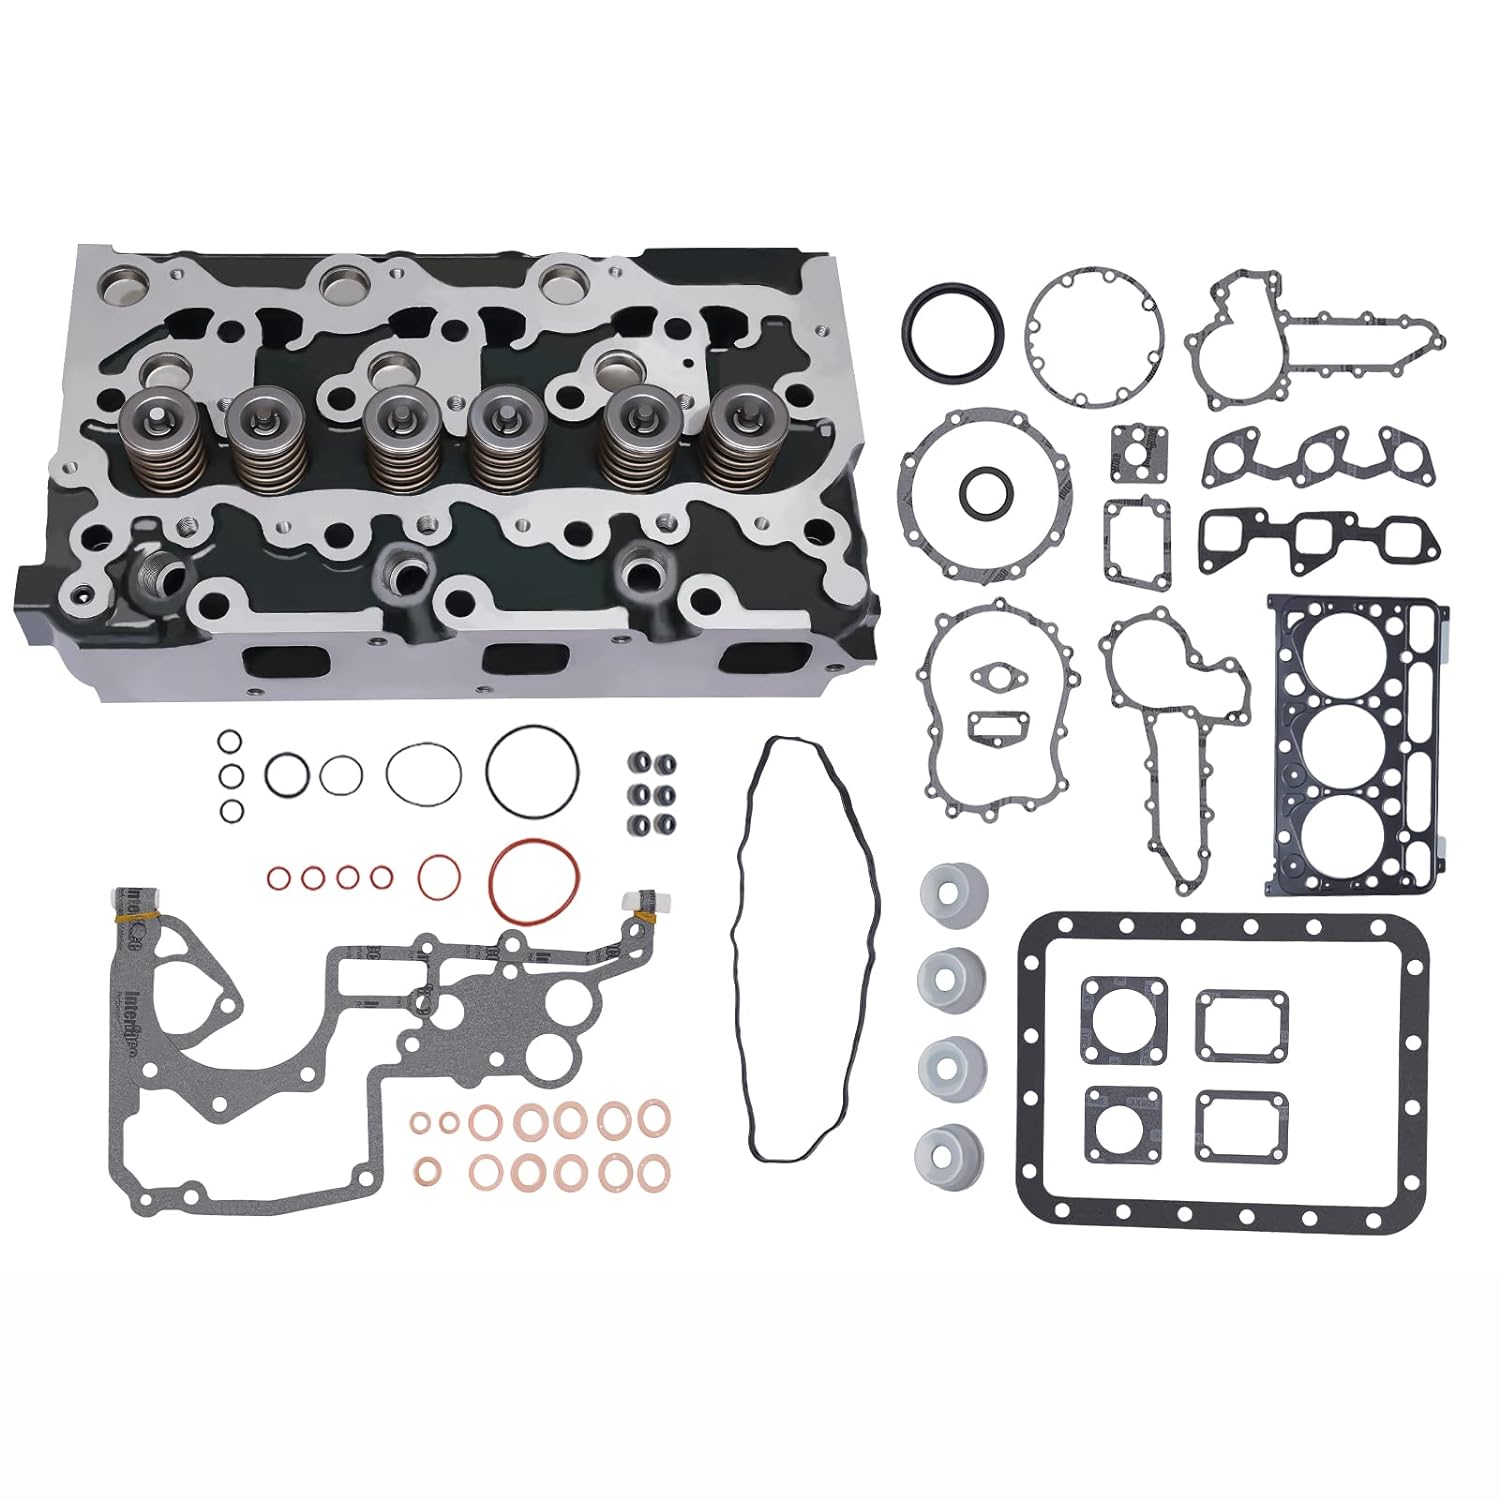 Complete Cylinder Head Assy for Kubota D1703 D1703E D1703B D1703EB Engine Cylinder Head with Full Gasket Kit - KUDUPARTS